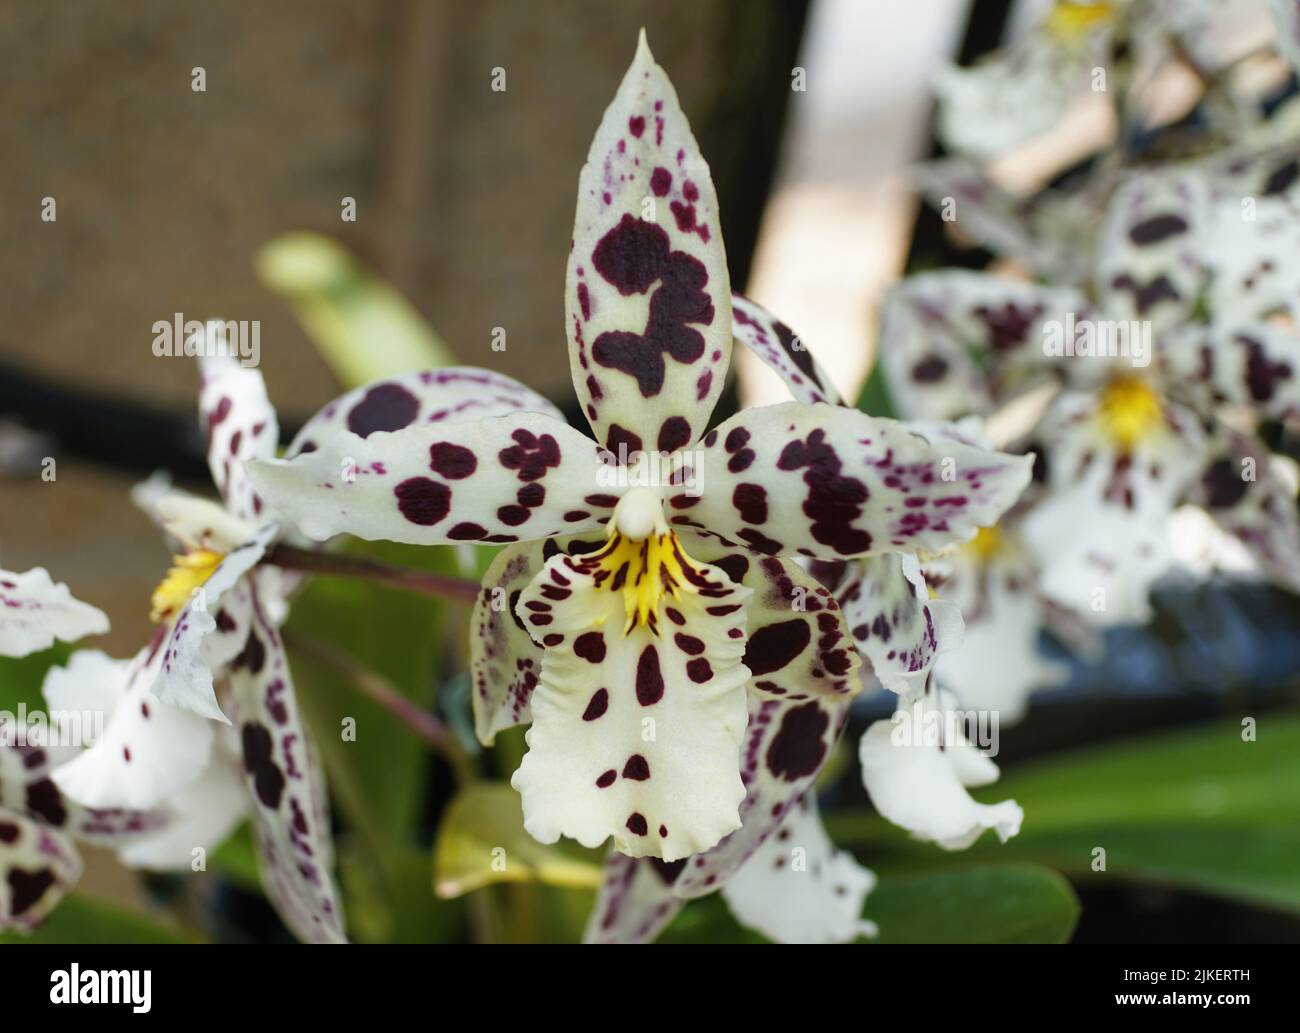 Beautiful white and dark speckled Intergeneric Oncidium hybrid orchid flower Stock Photo